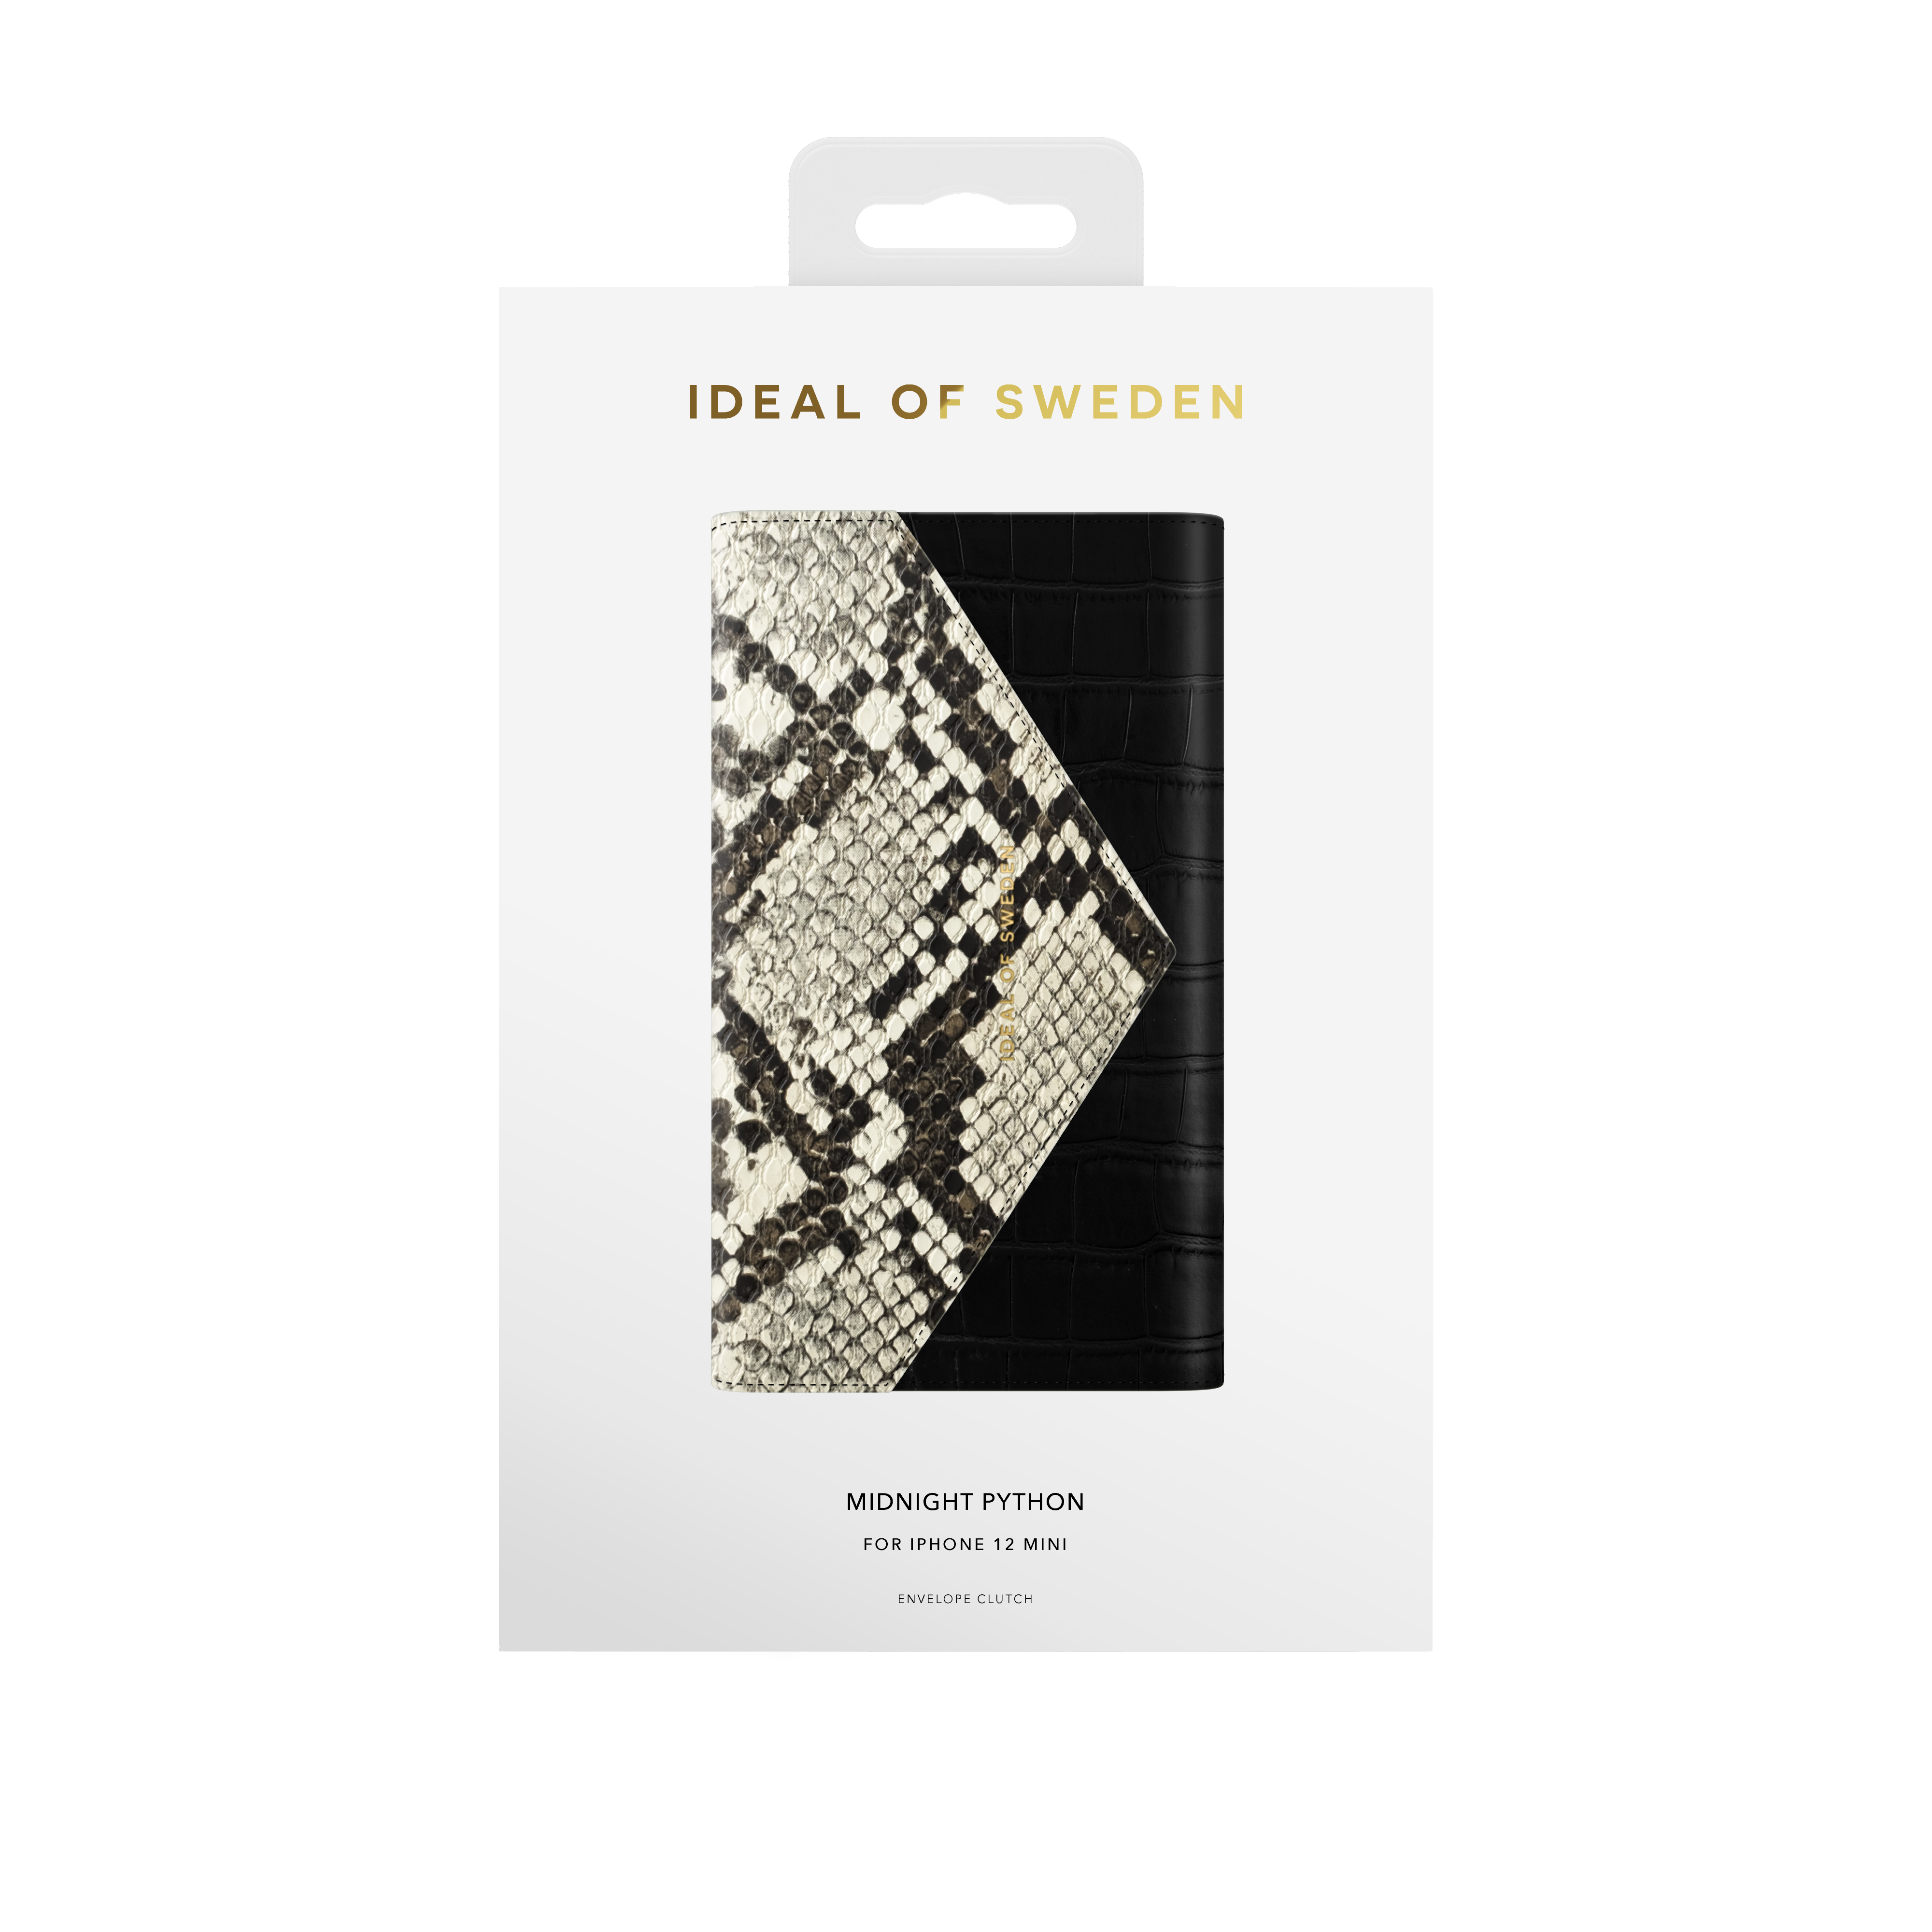 IDEAL OF SWEDEN IDECSS20-I2054-199, Full Python Cover, Apple, 12 Midnight Mini, IPhone